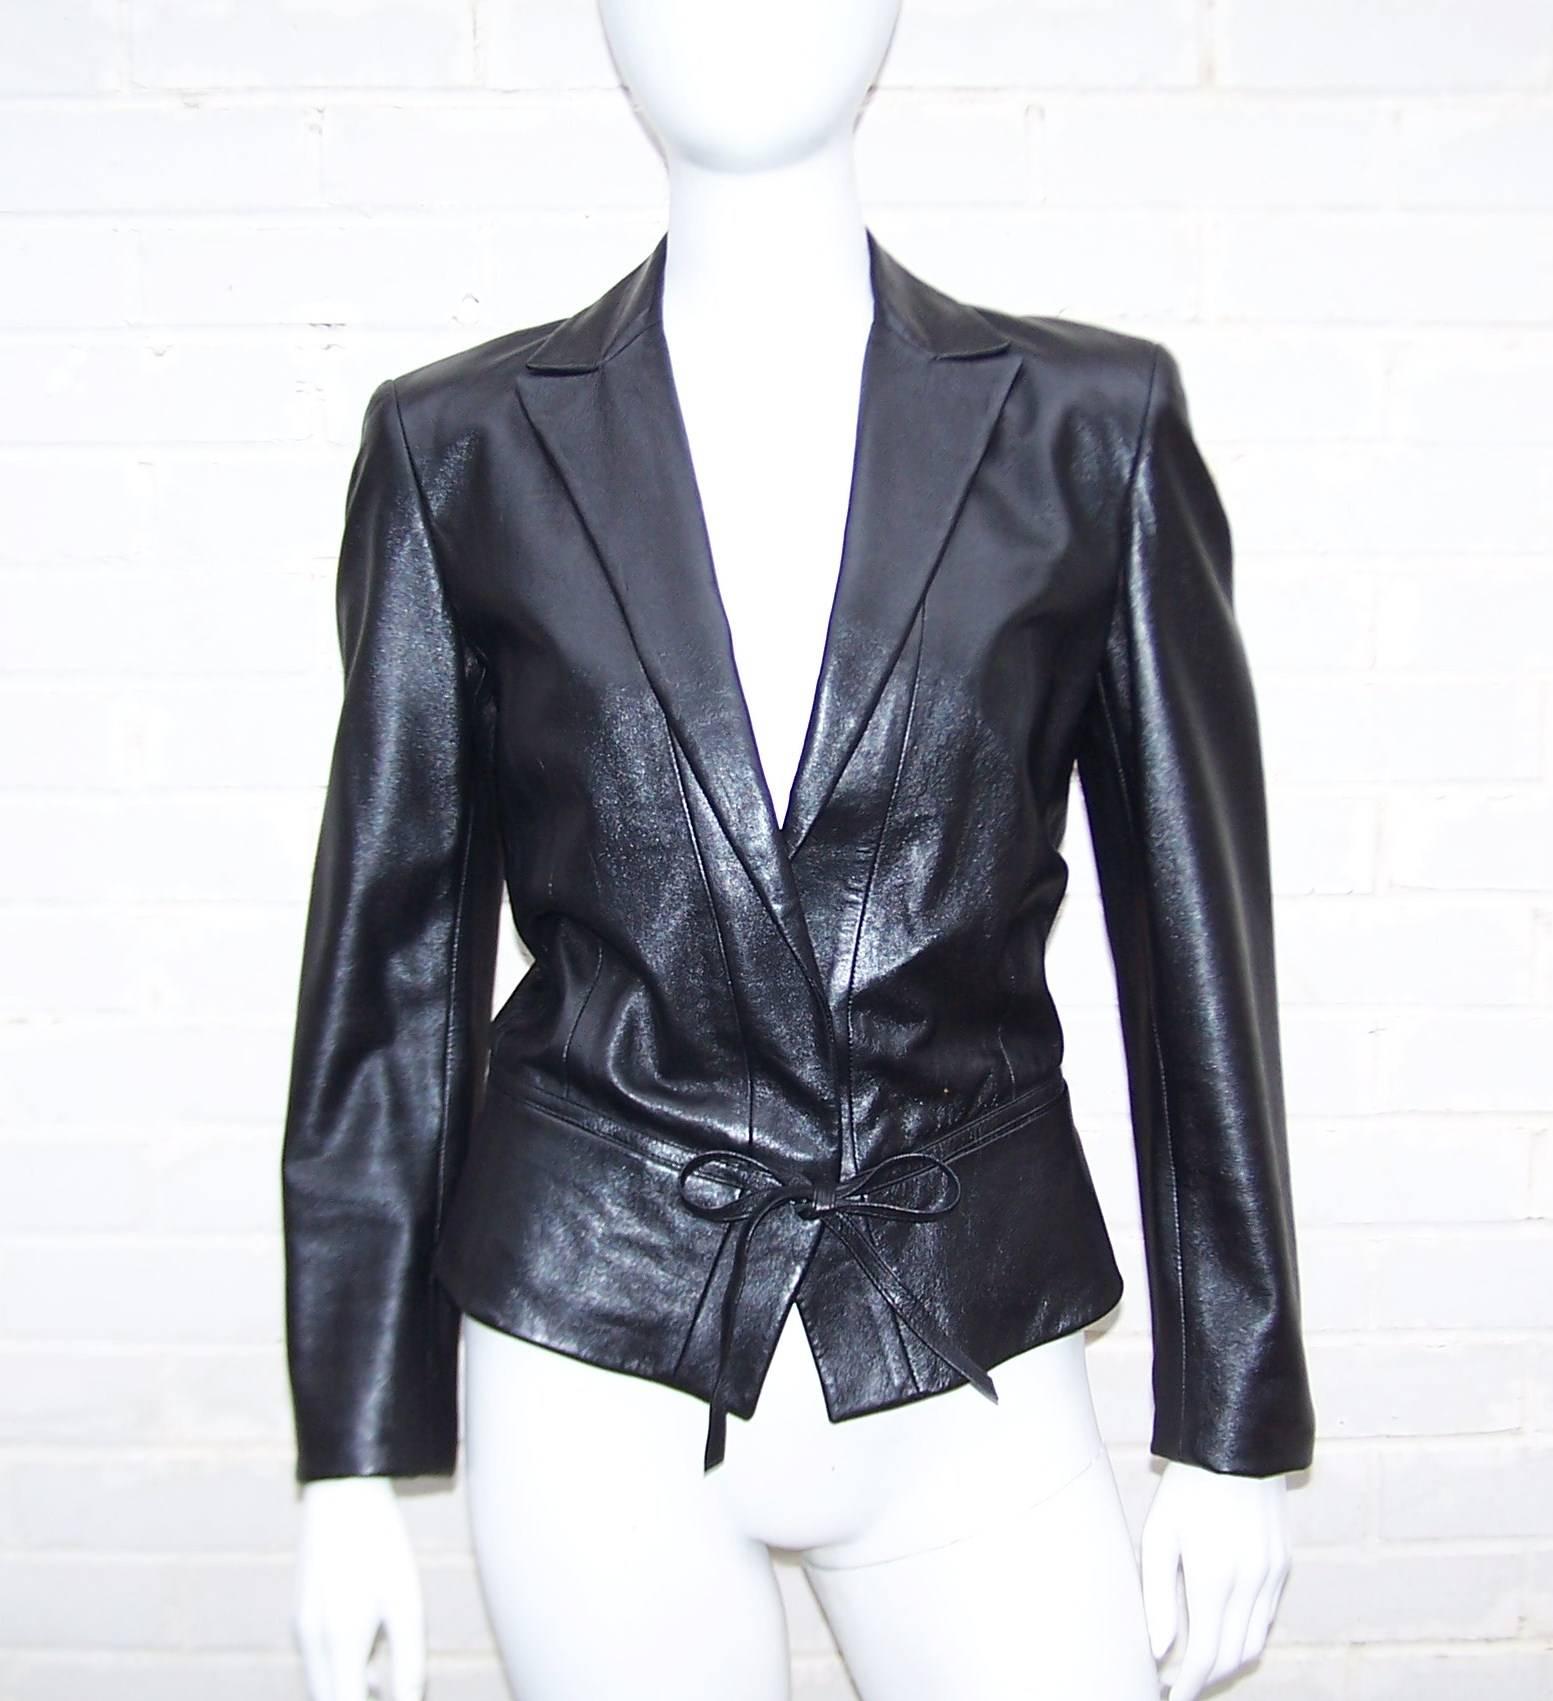 Richard Tyler has combined expert tailoring with a hint of menswear style to create a black leather jacket perfect for many looks and occasions.  The jacket has two hidden buttons at the front with a flat skirt style waist and built-in tie.  Two